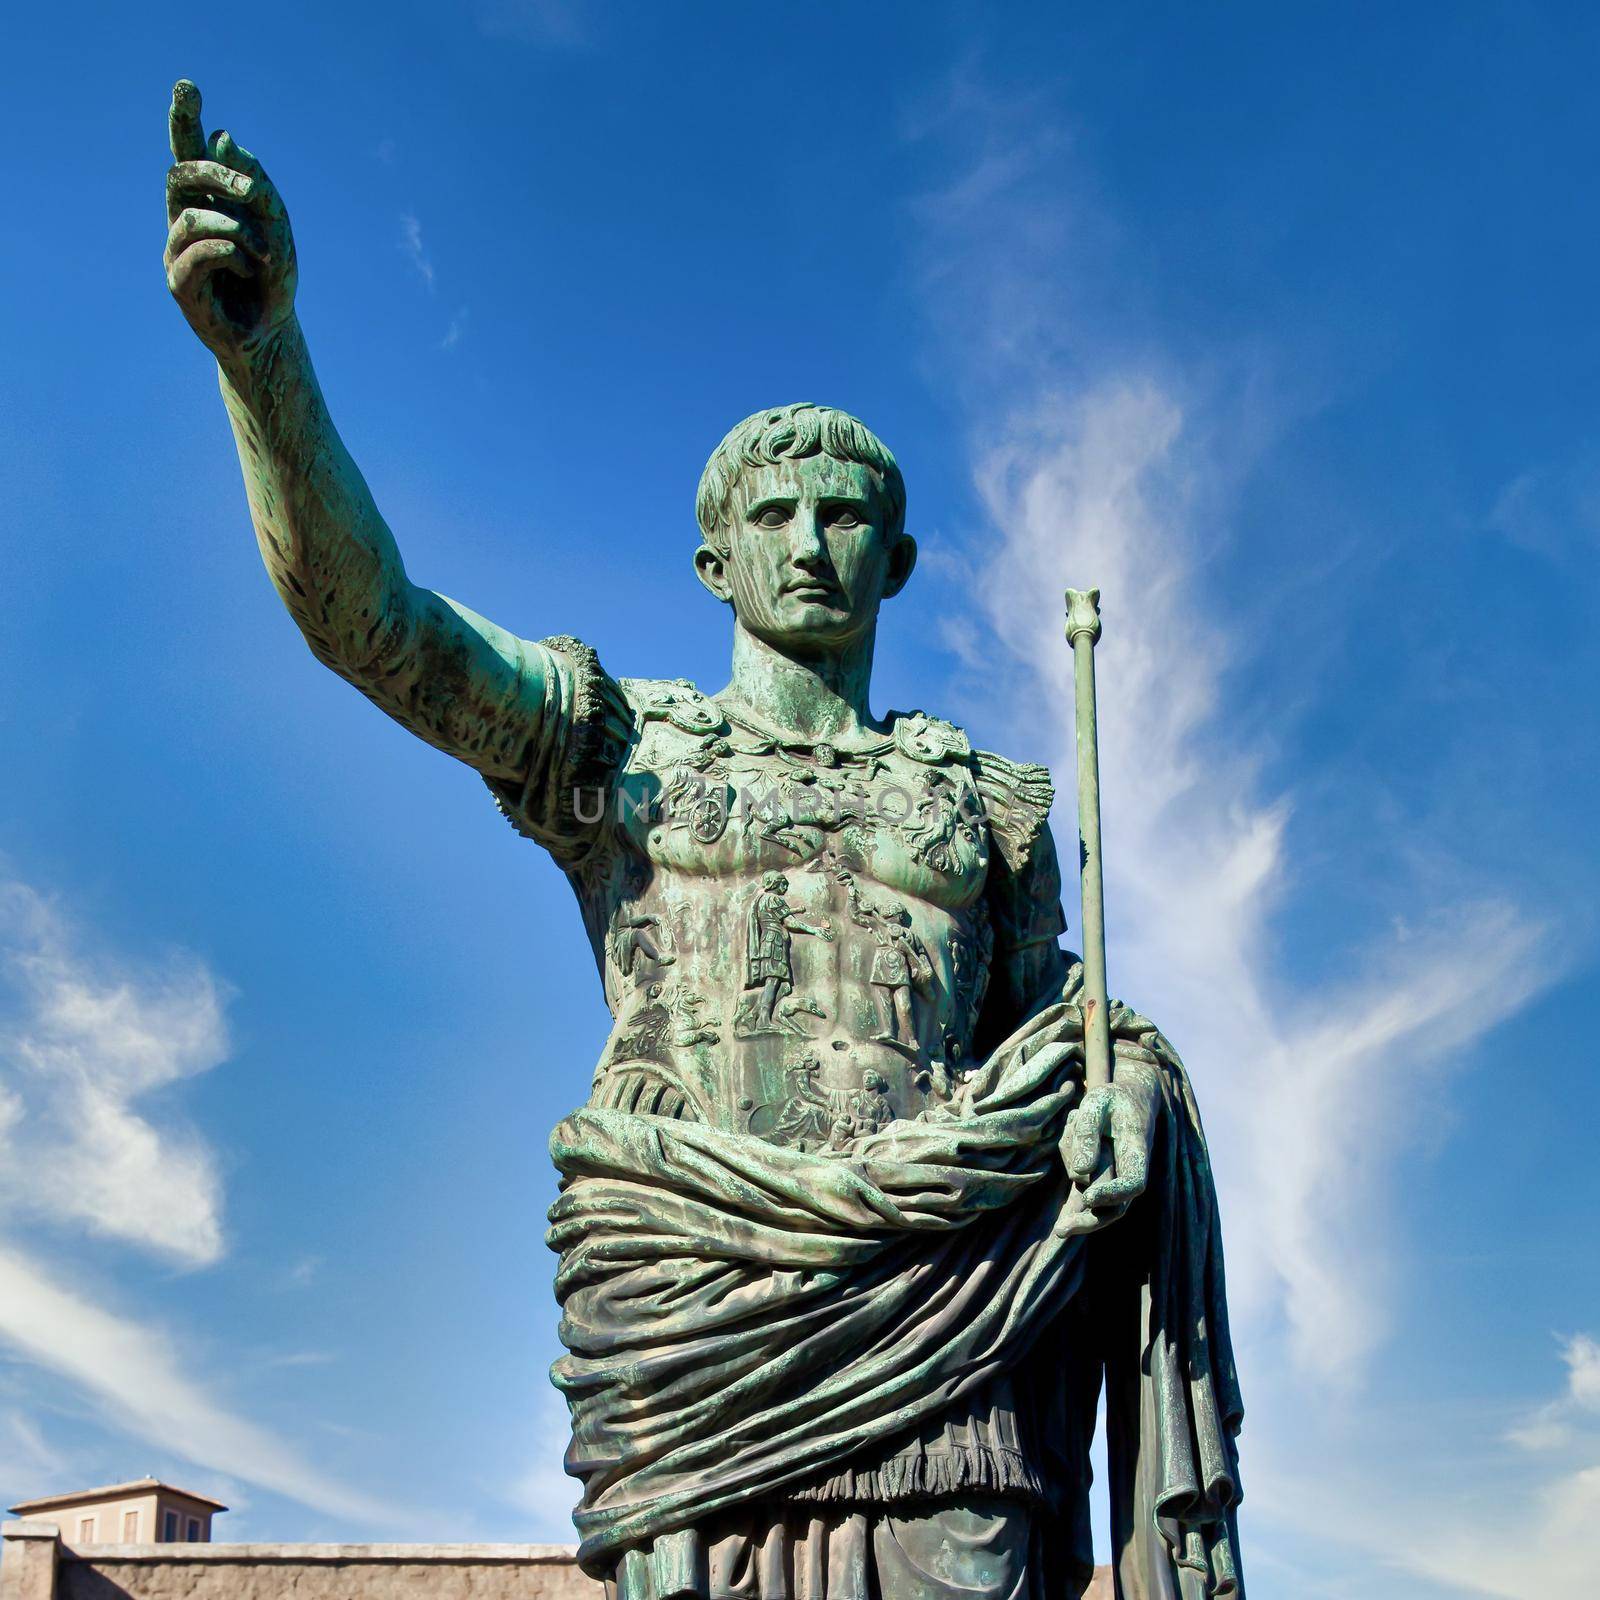 Italy, Rome. Statue in a public street of the roman emperor Gaius Julius Caesar. Concept for authority, domination, leadership and guidance.